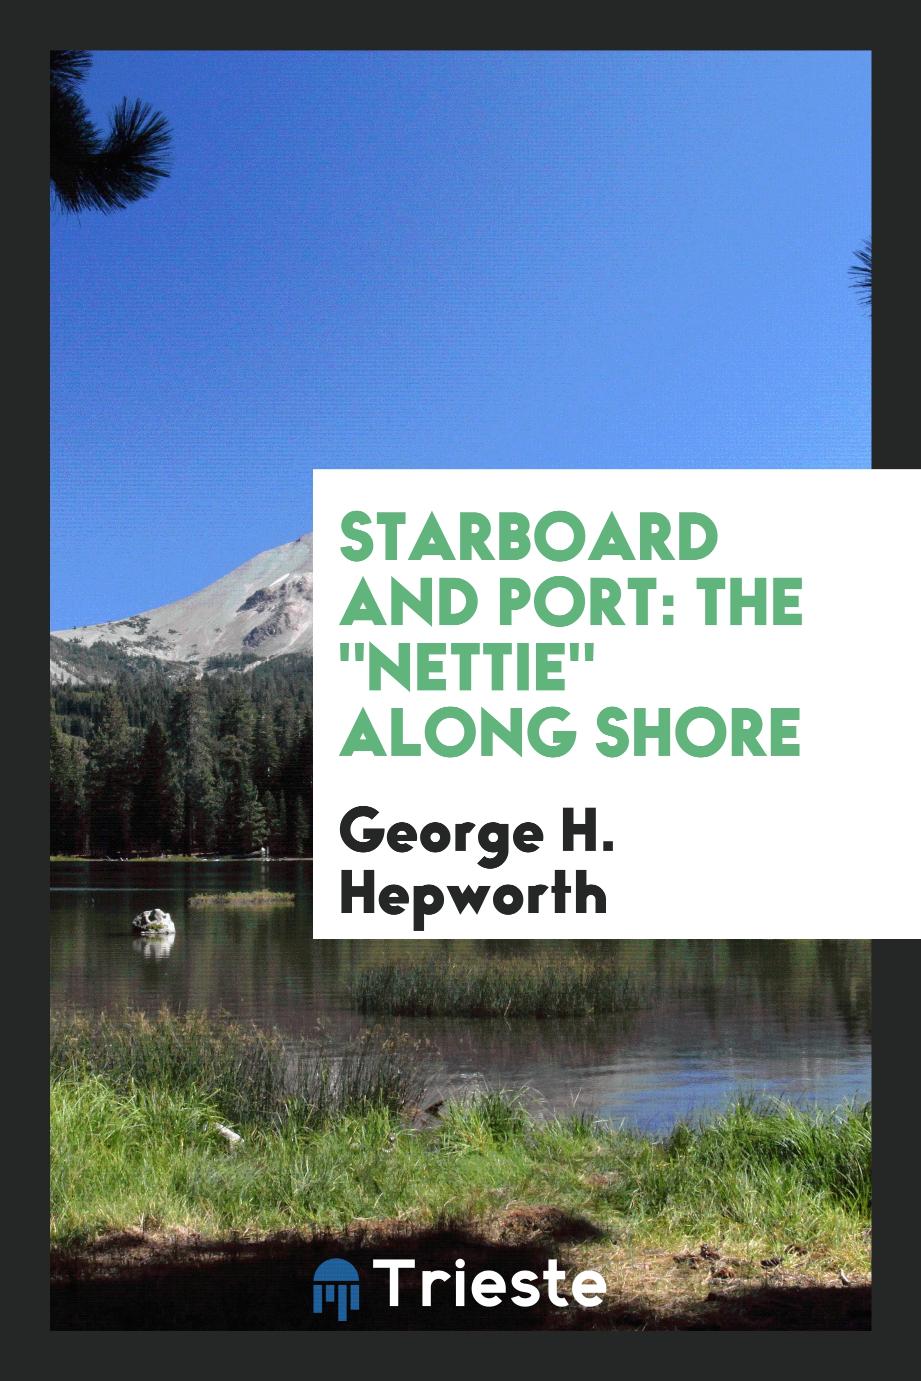 Starboard and port: the "Nettie" along shore